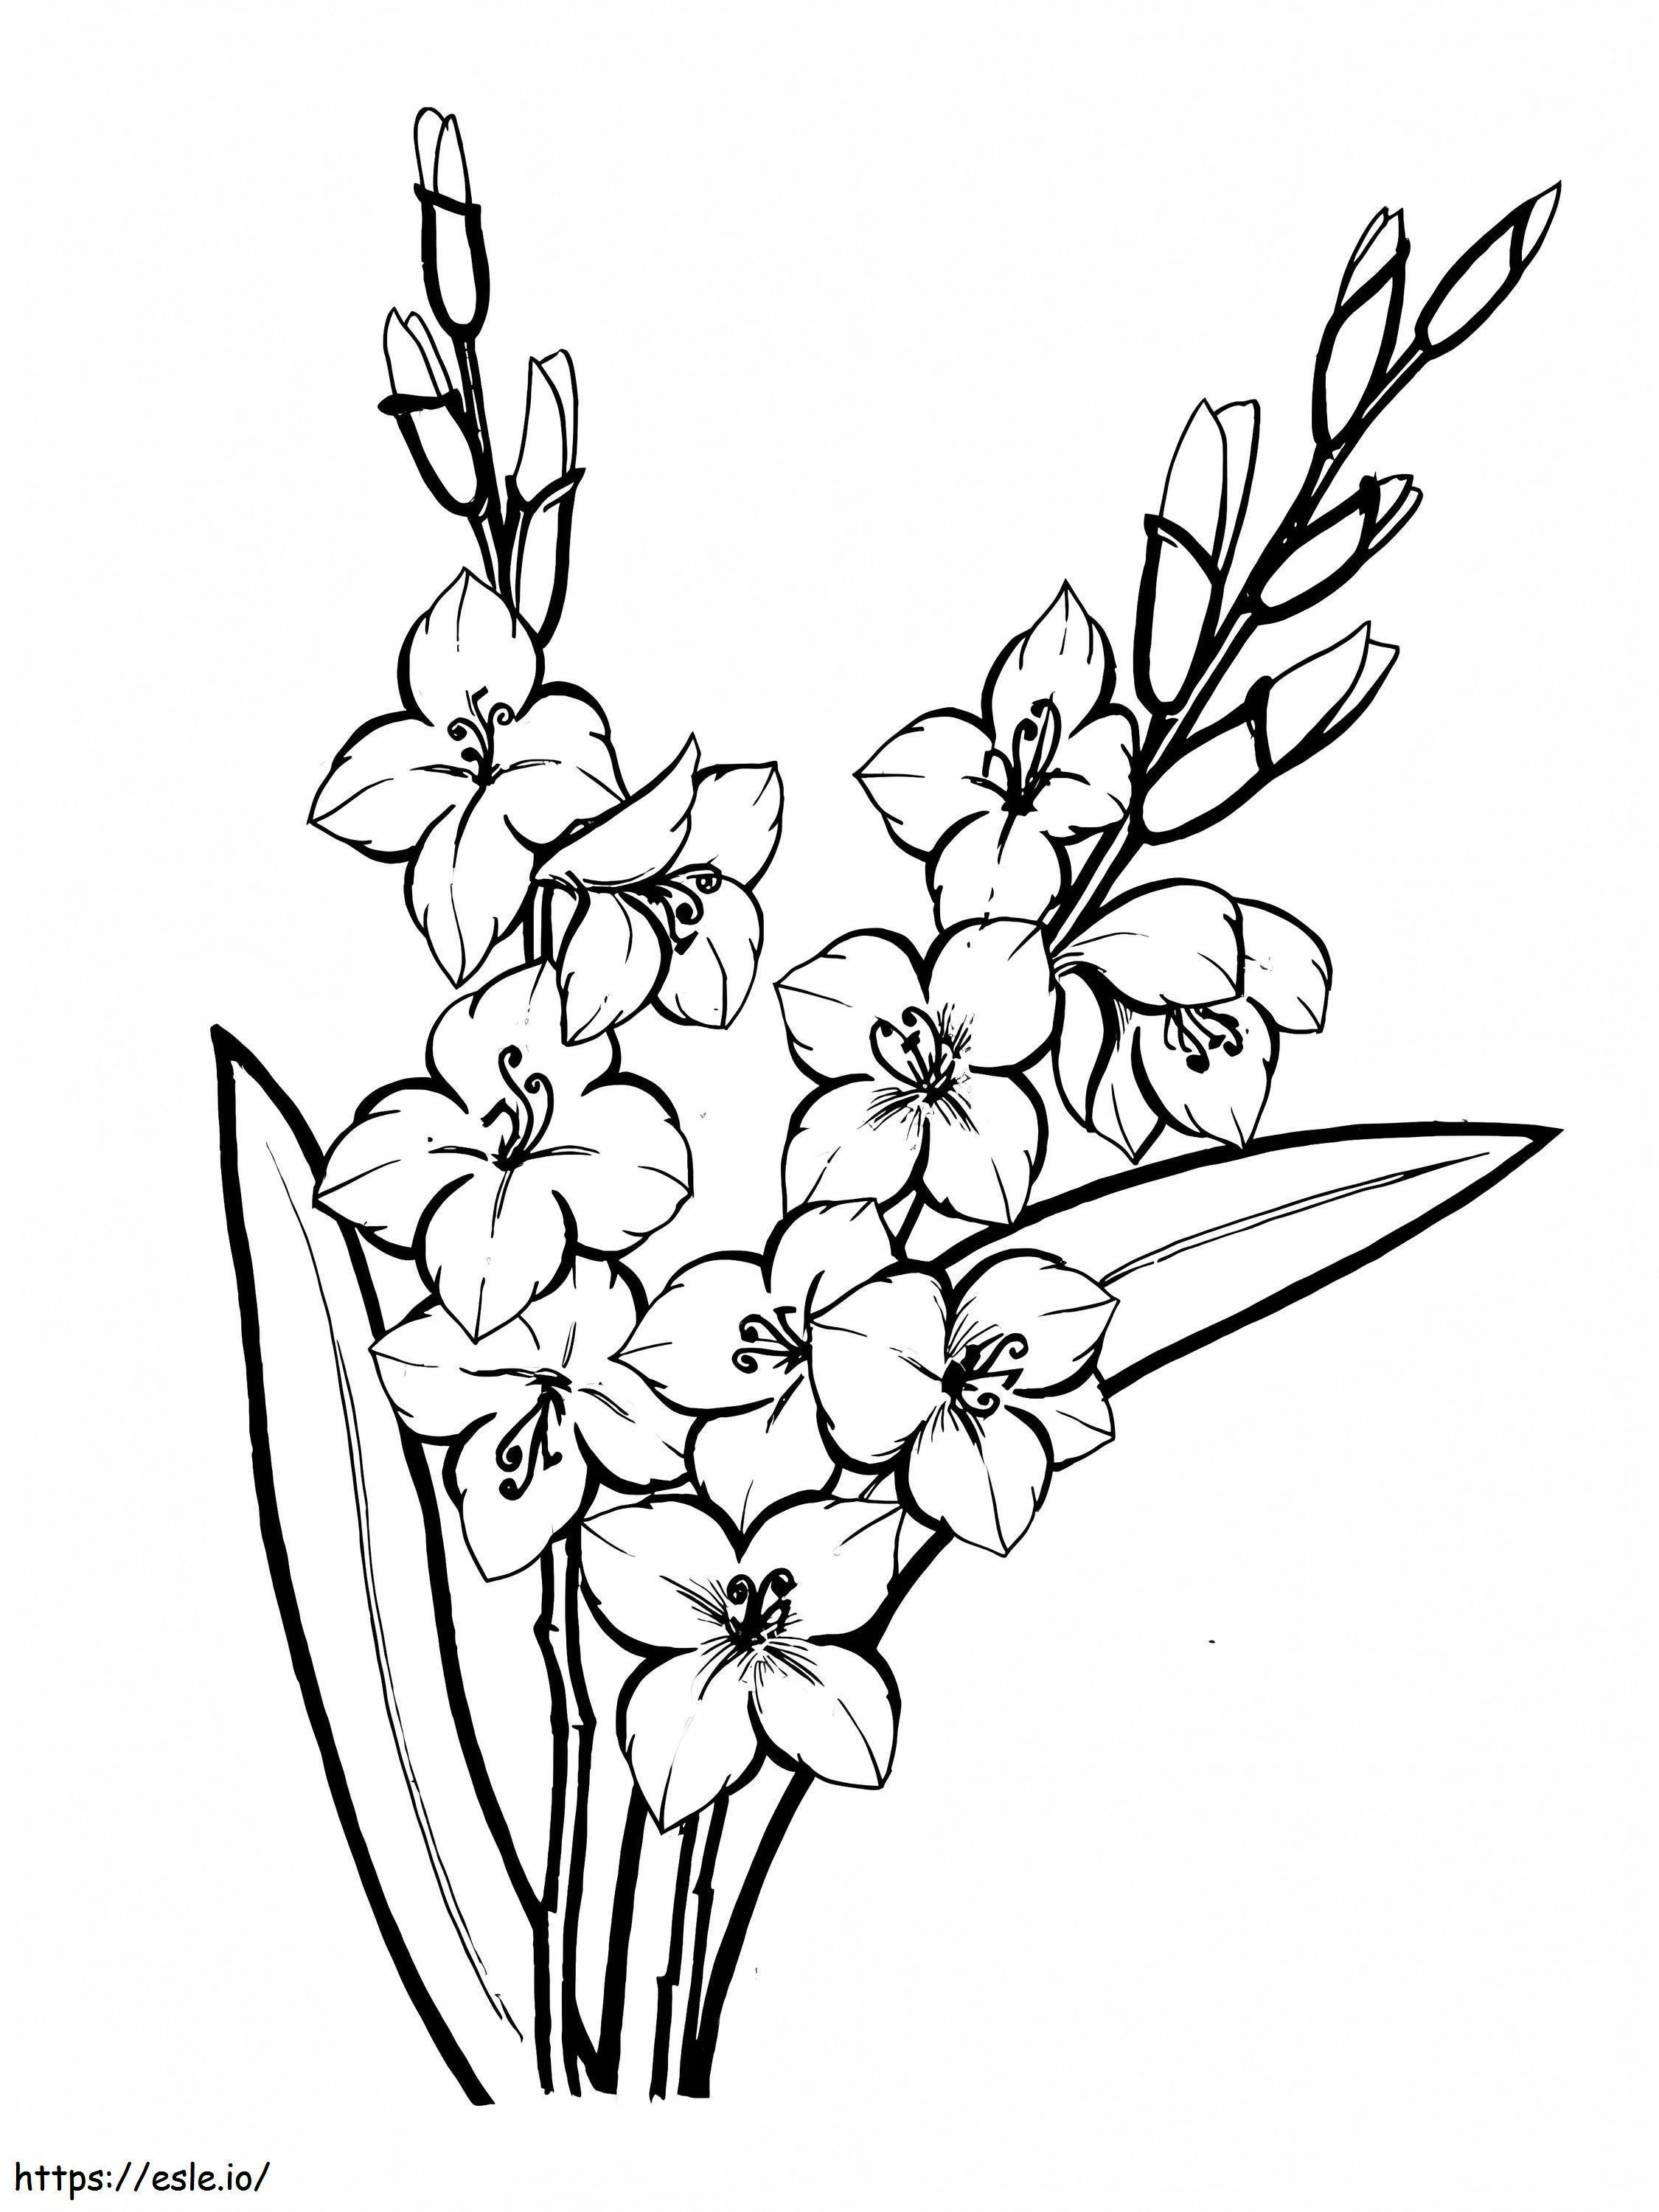 Gladiolus Flowers 5 coloring page